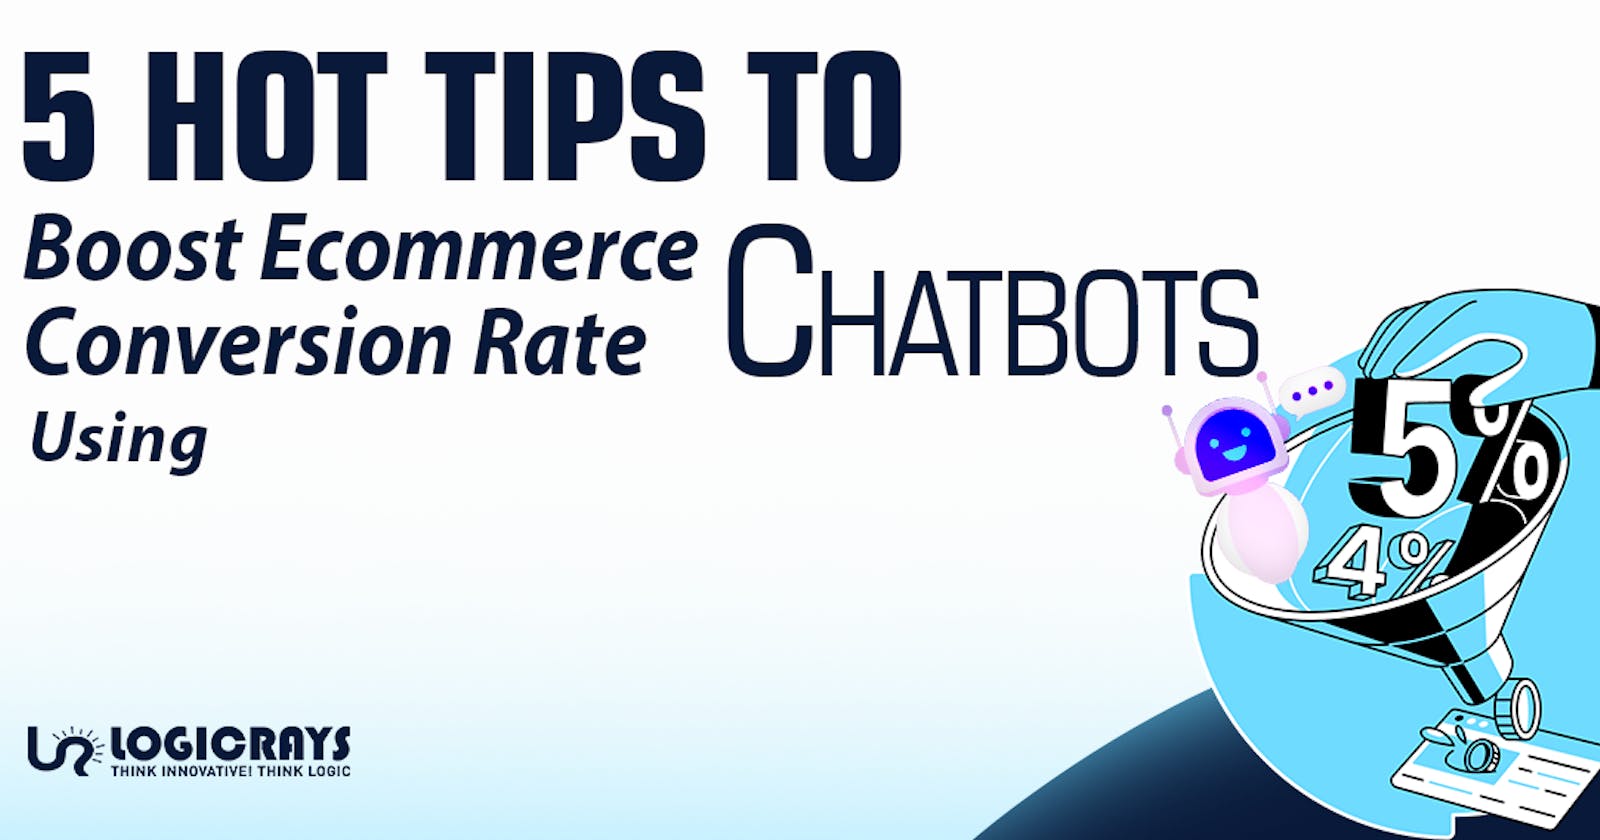 5 Tips To Boost E-commerce Conversion Rate Using Chatbots